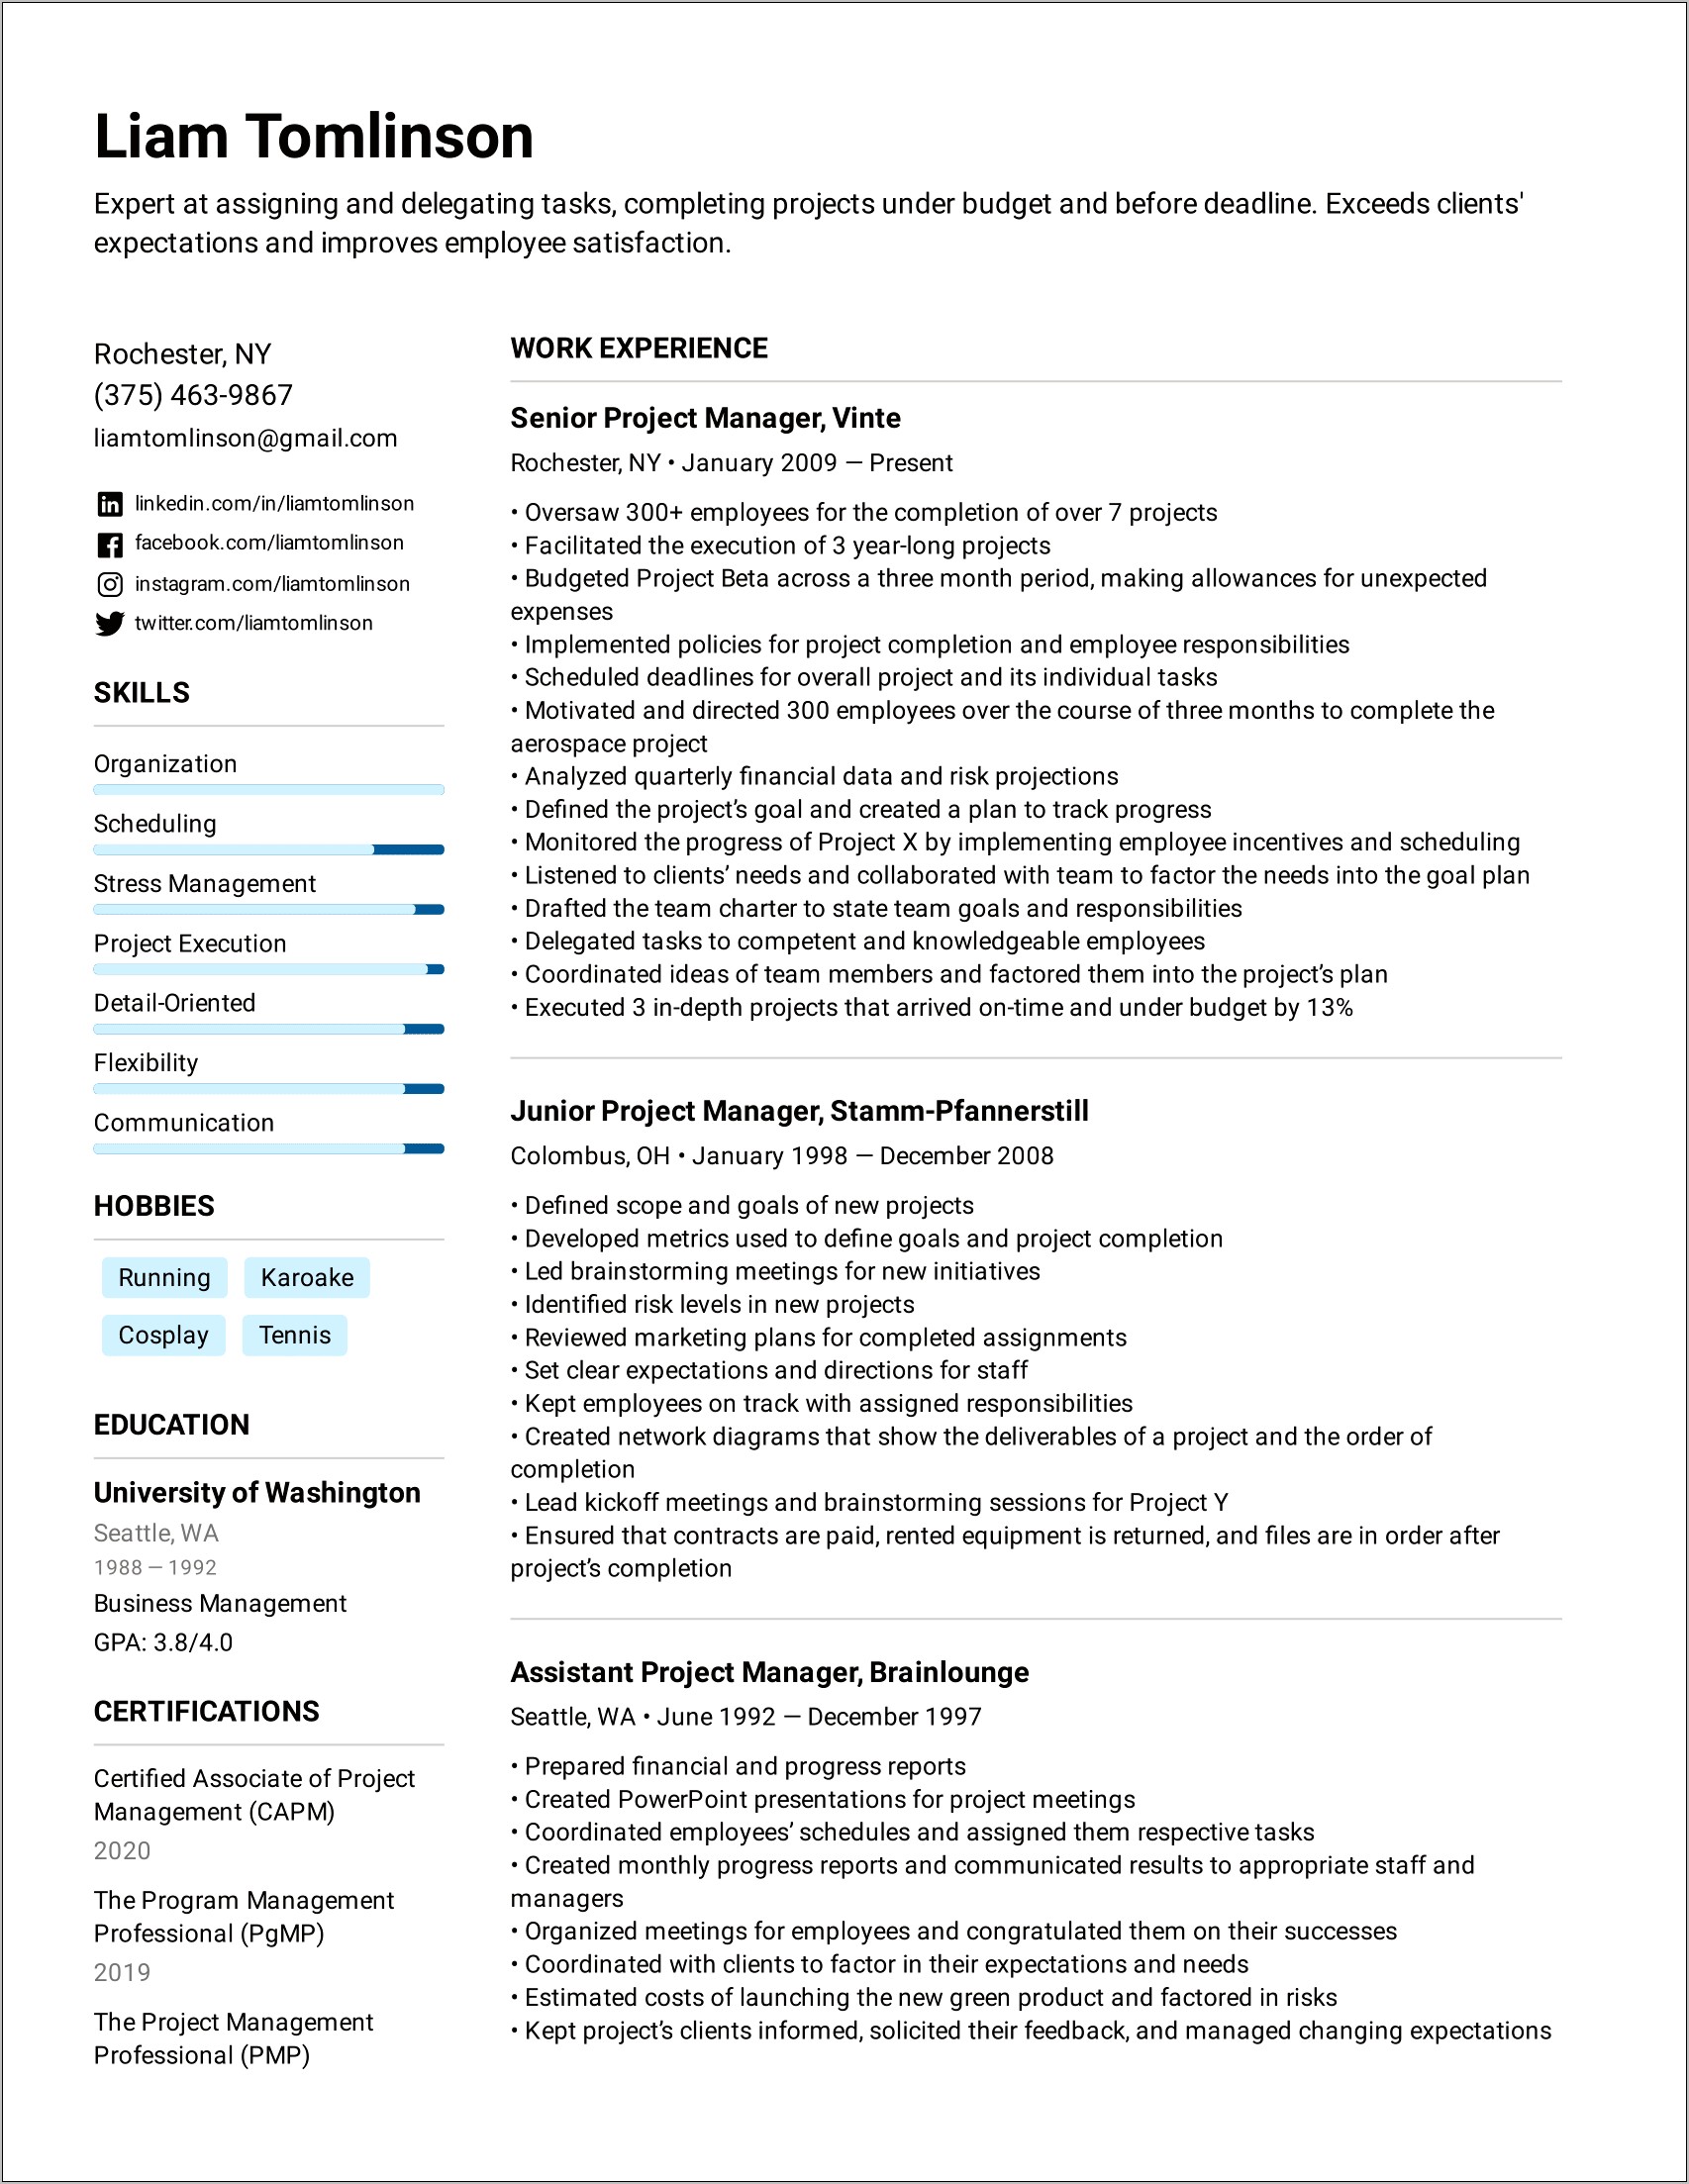 Sample Resume Objective Statements For Customer Service